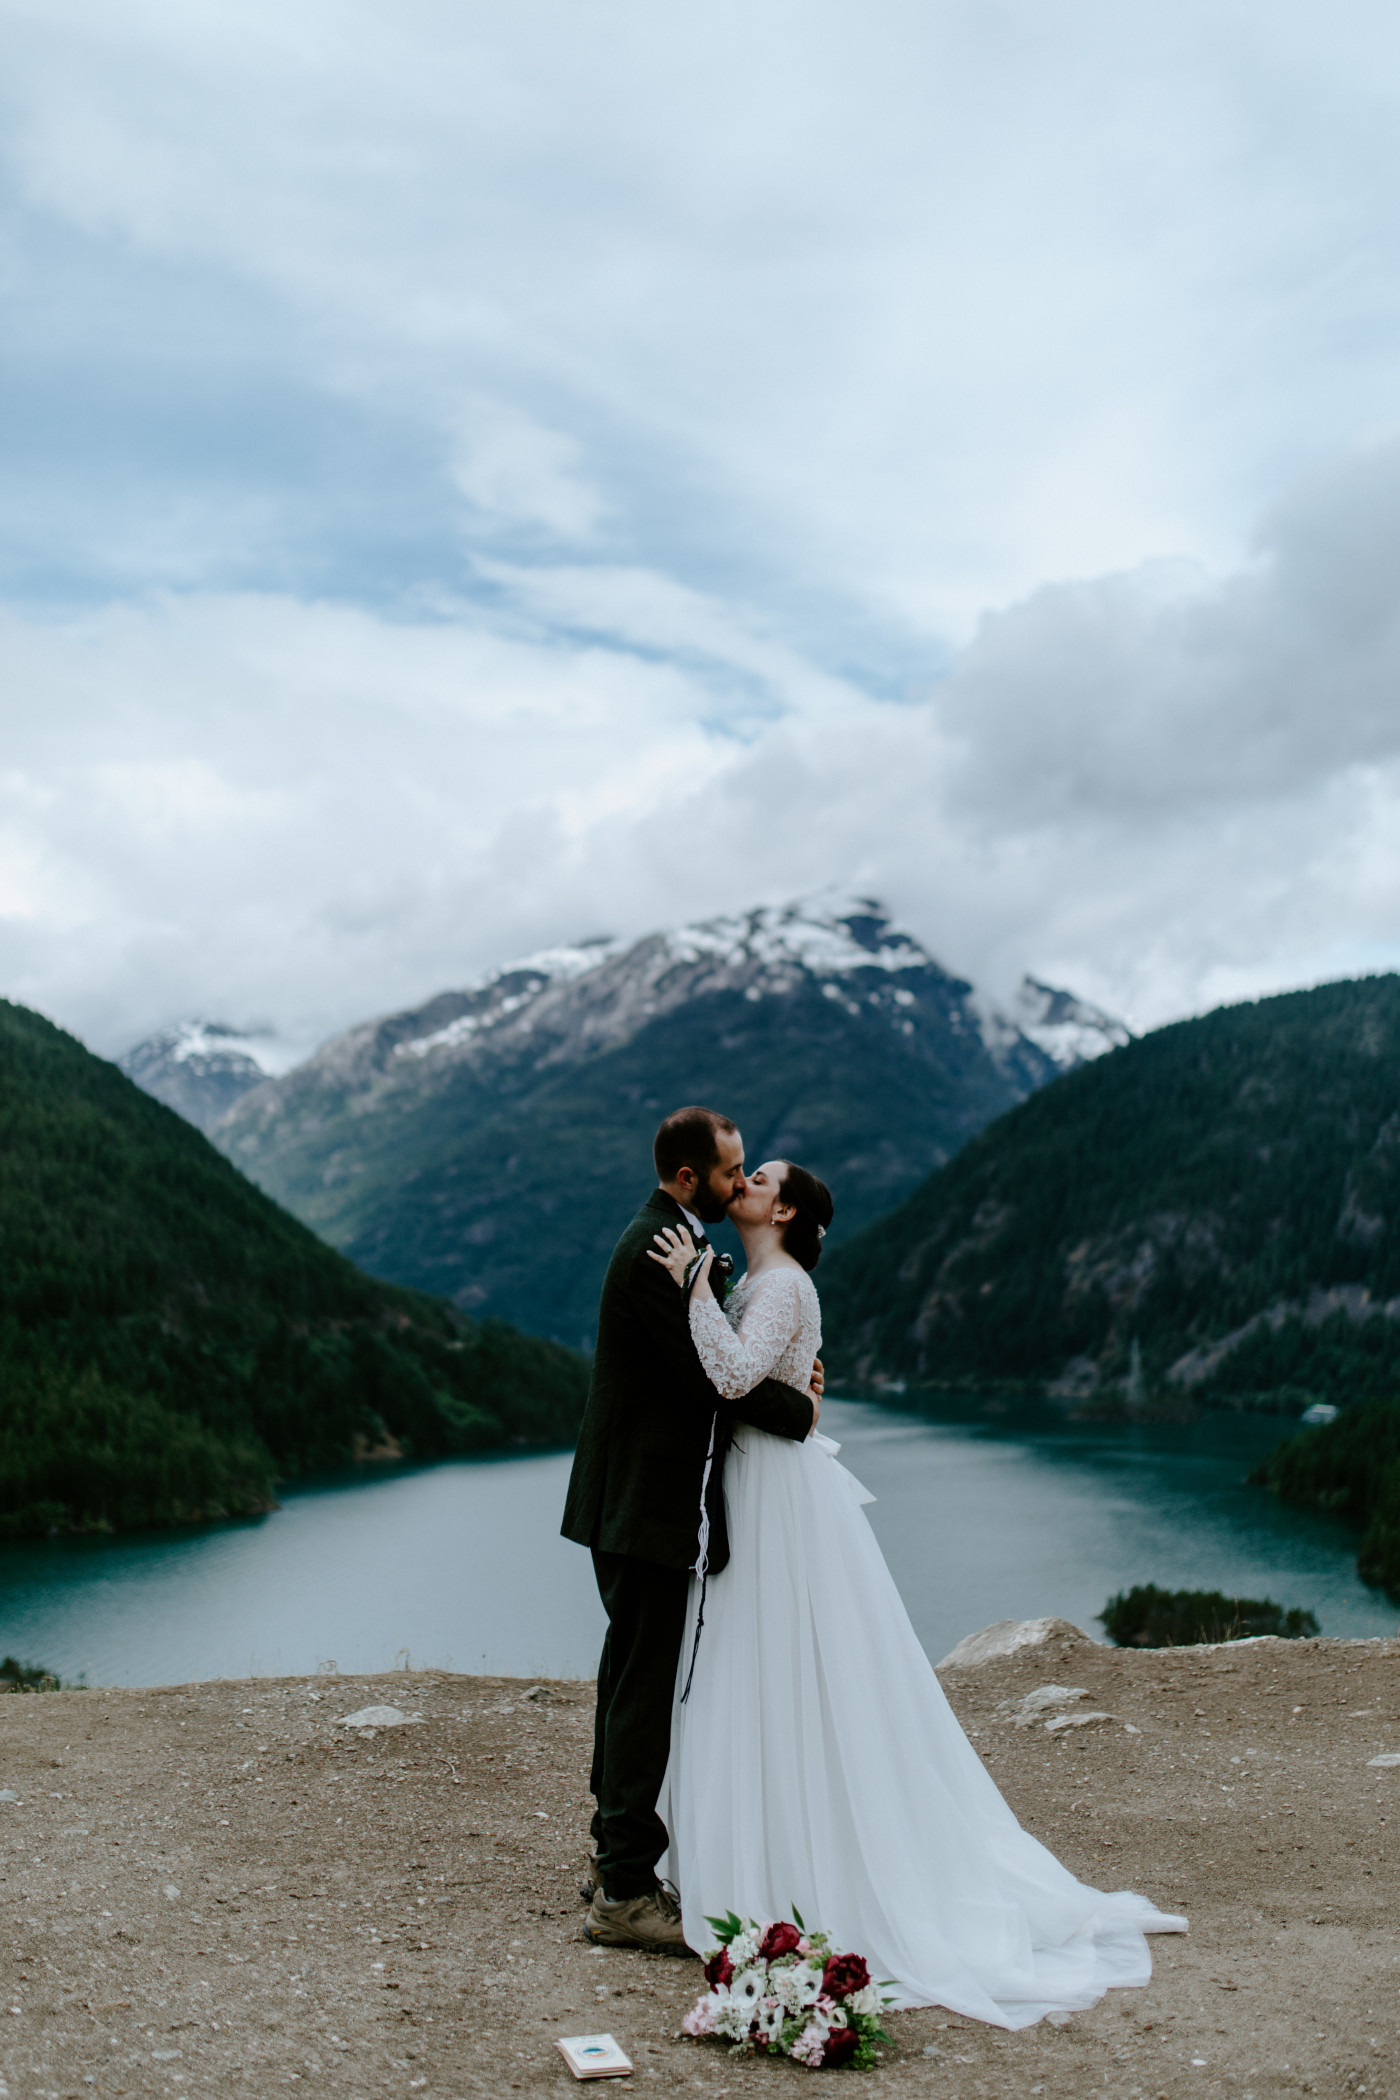 Alex and Elizabeth kiss. Elopement photography at North Cascades National Park by Sienna Plus Josh.